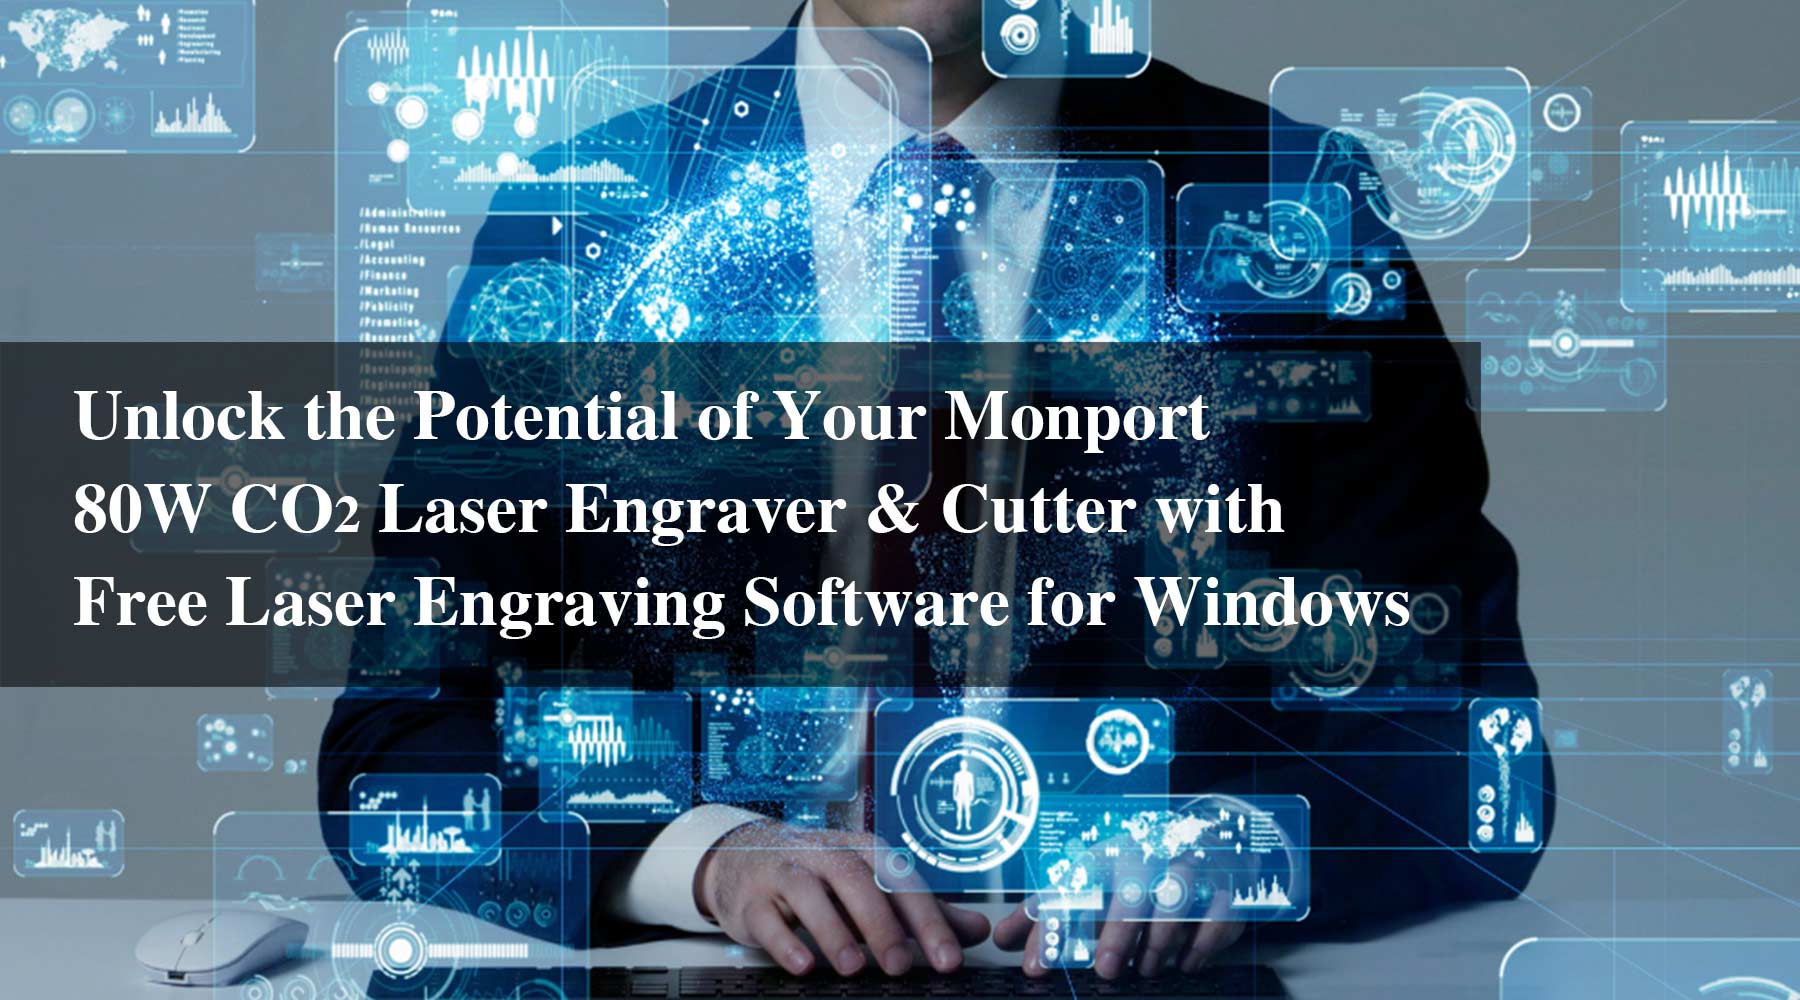 Unlock the Potential of Your Monport 80W CO2 Laser Engraver & Cutter with Free Laser Engraving Software for Windows